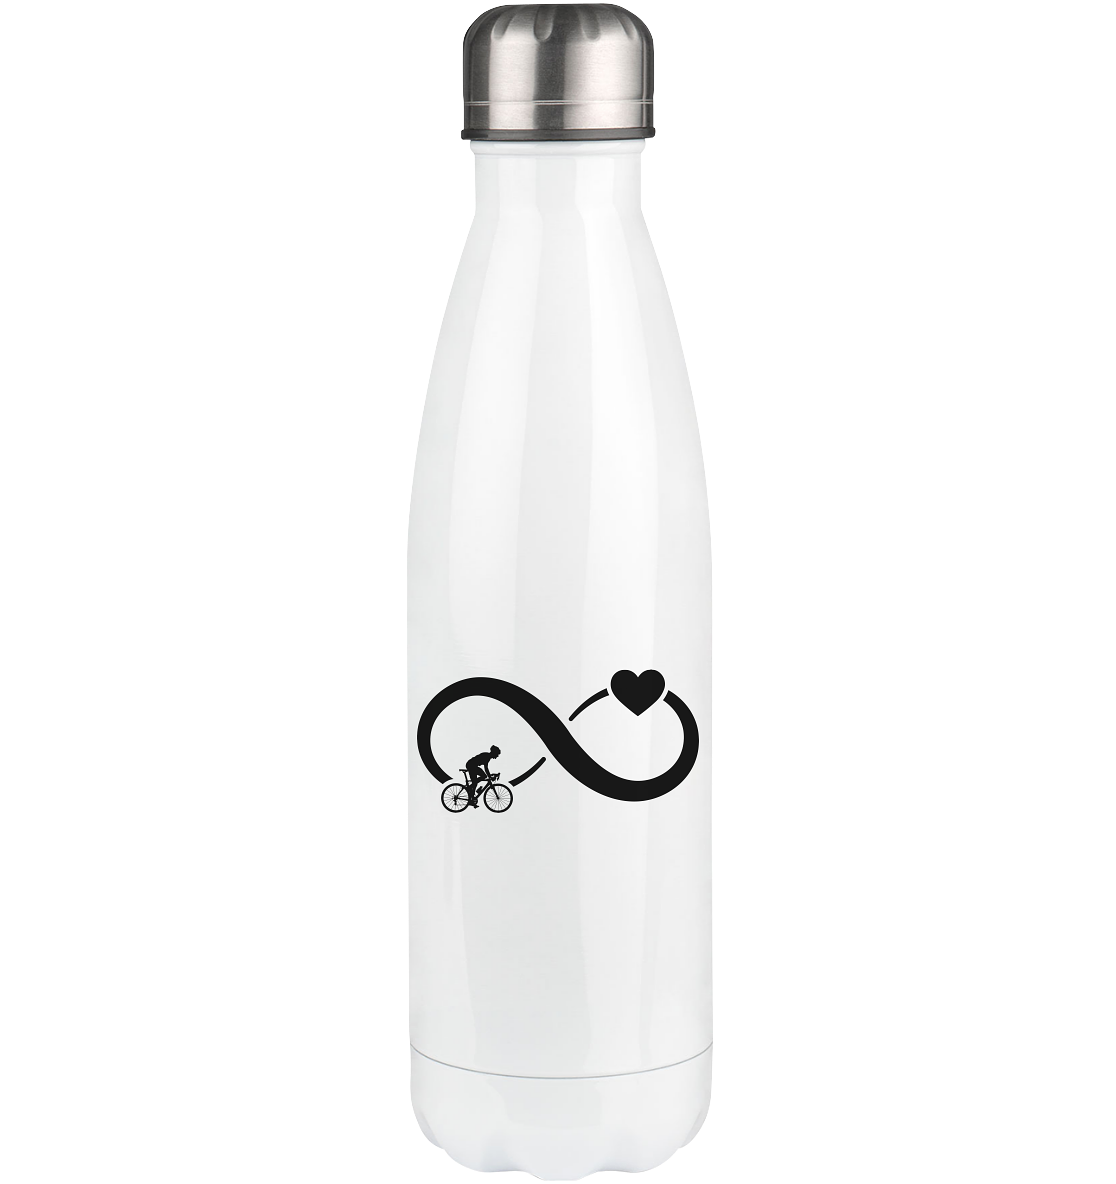 Infinity Heart and Cycling 1 - Edelstahl Thermosflasche fahrrad 500ml